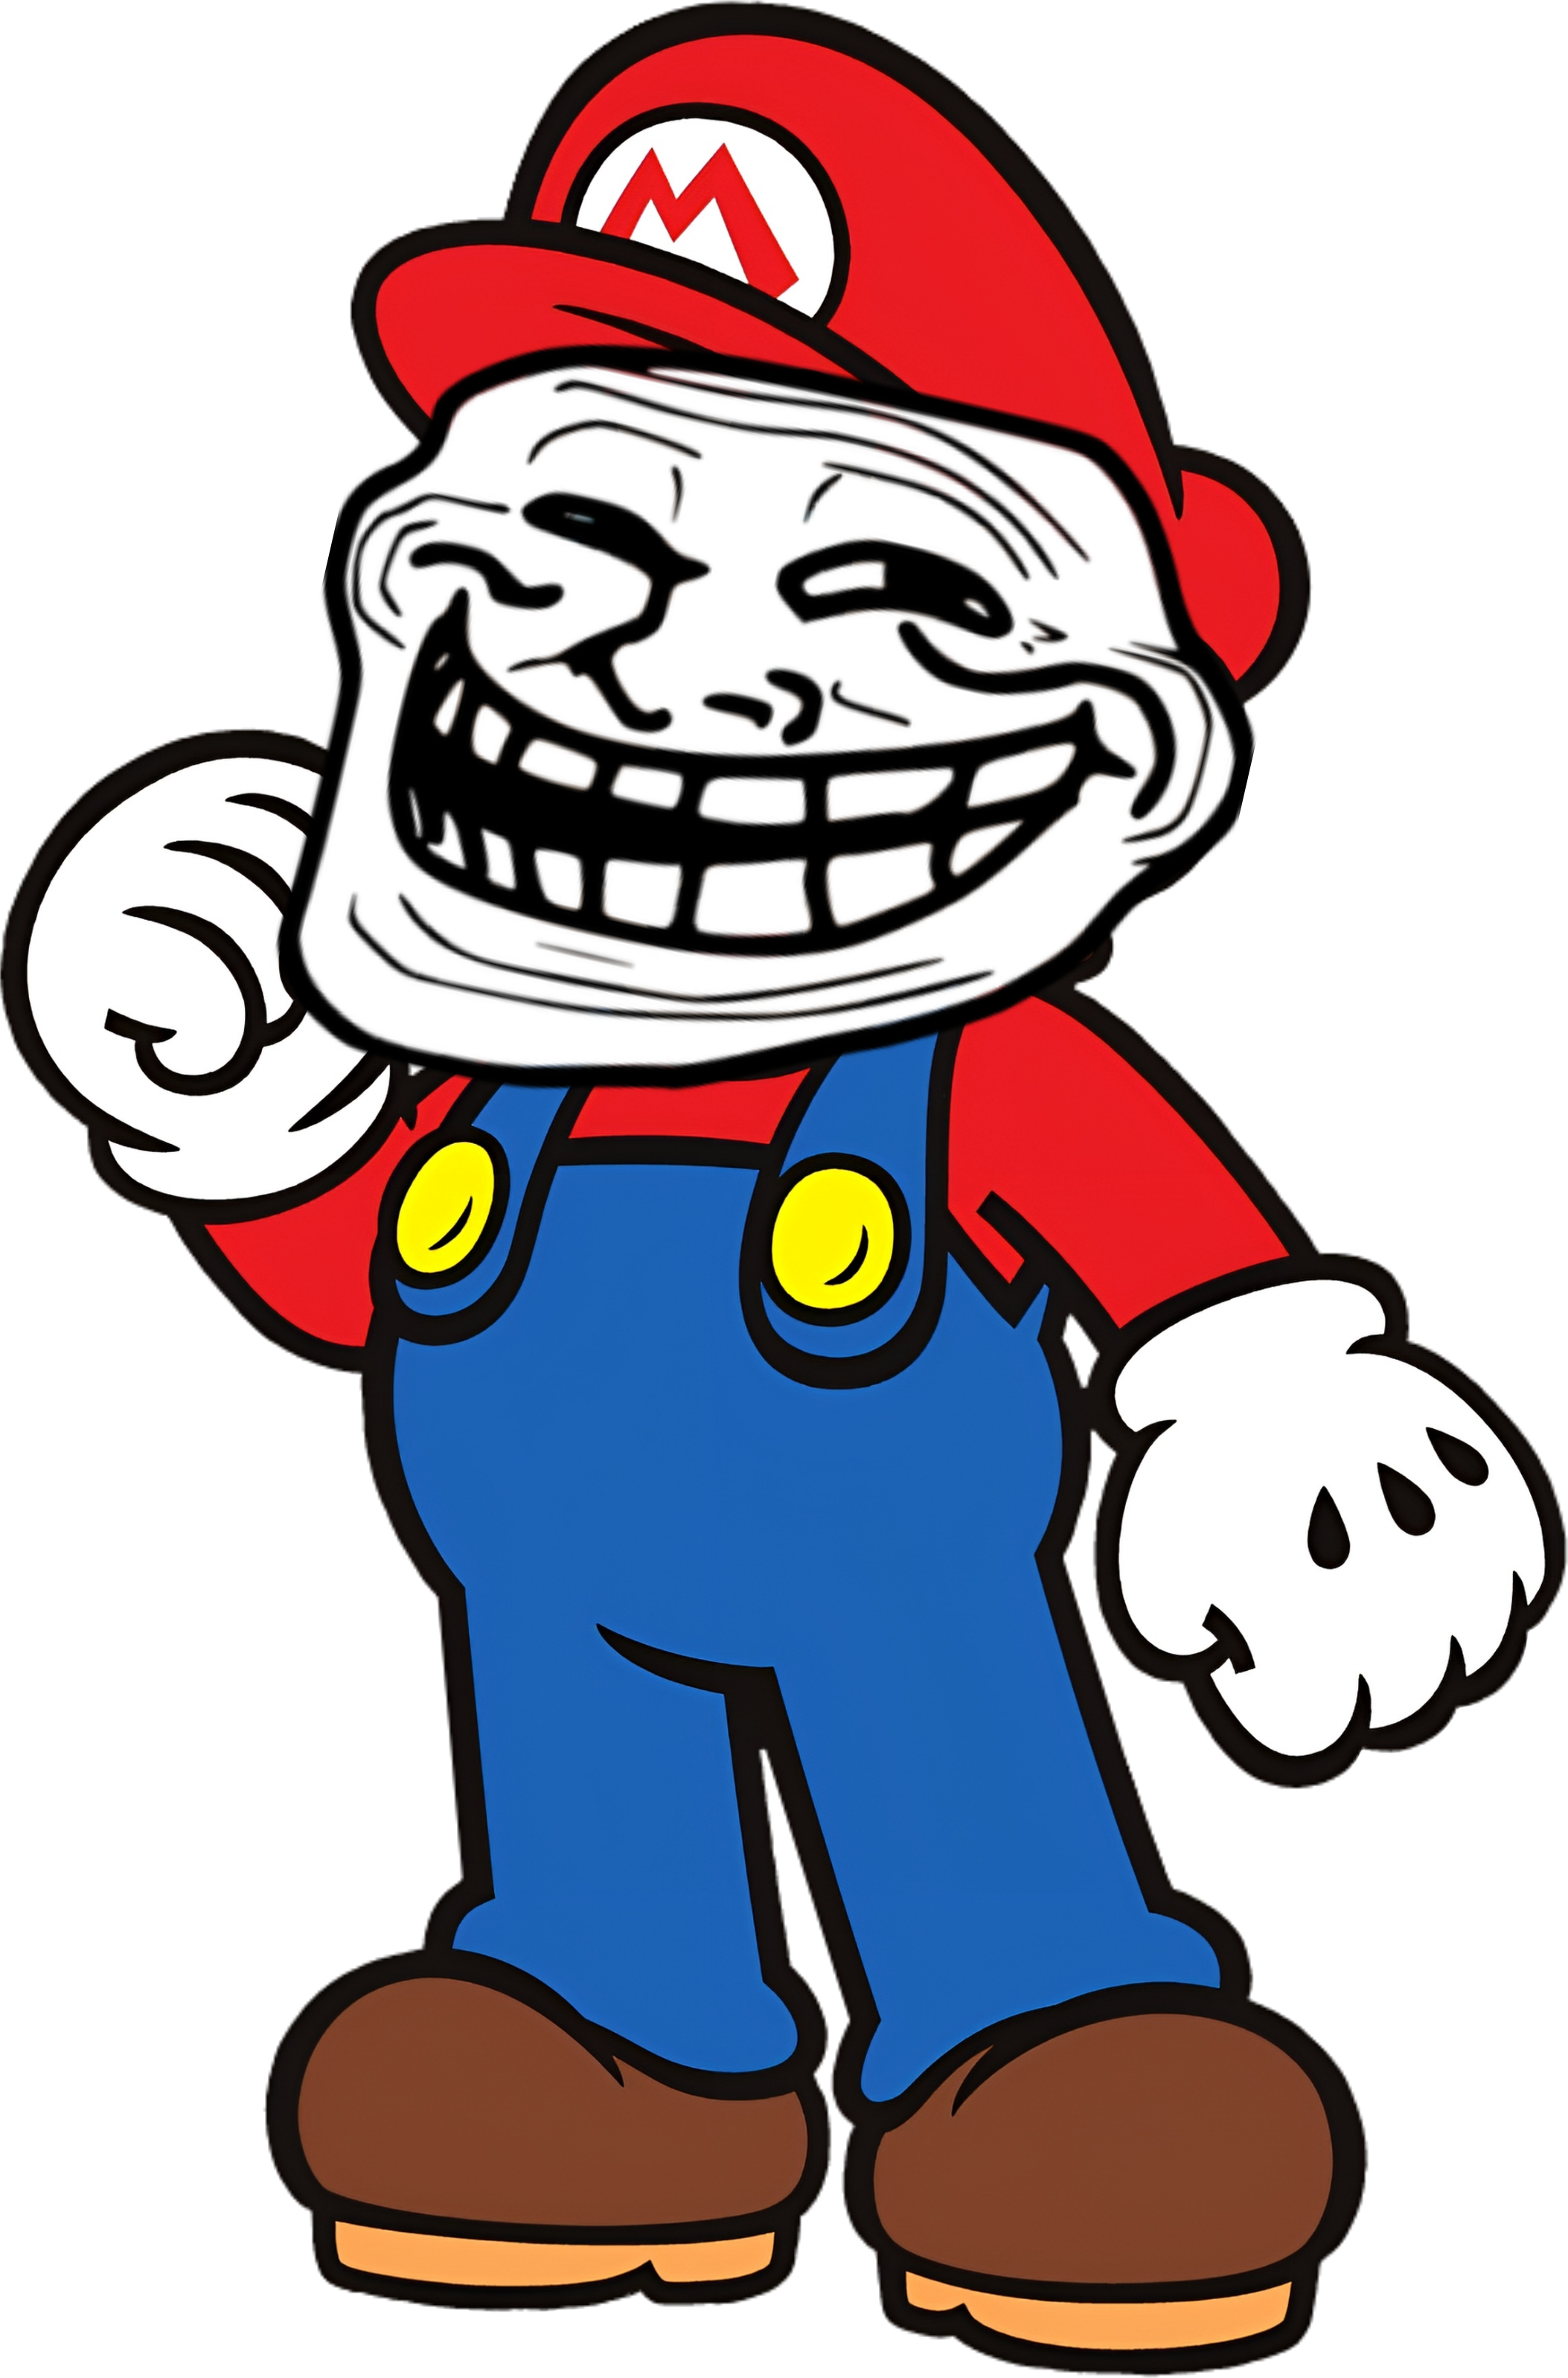 Mario with Troll Face 4 by UP844TrainFans2022 on DeviantArt